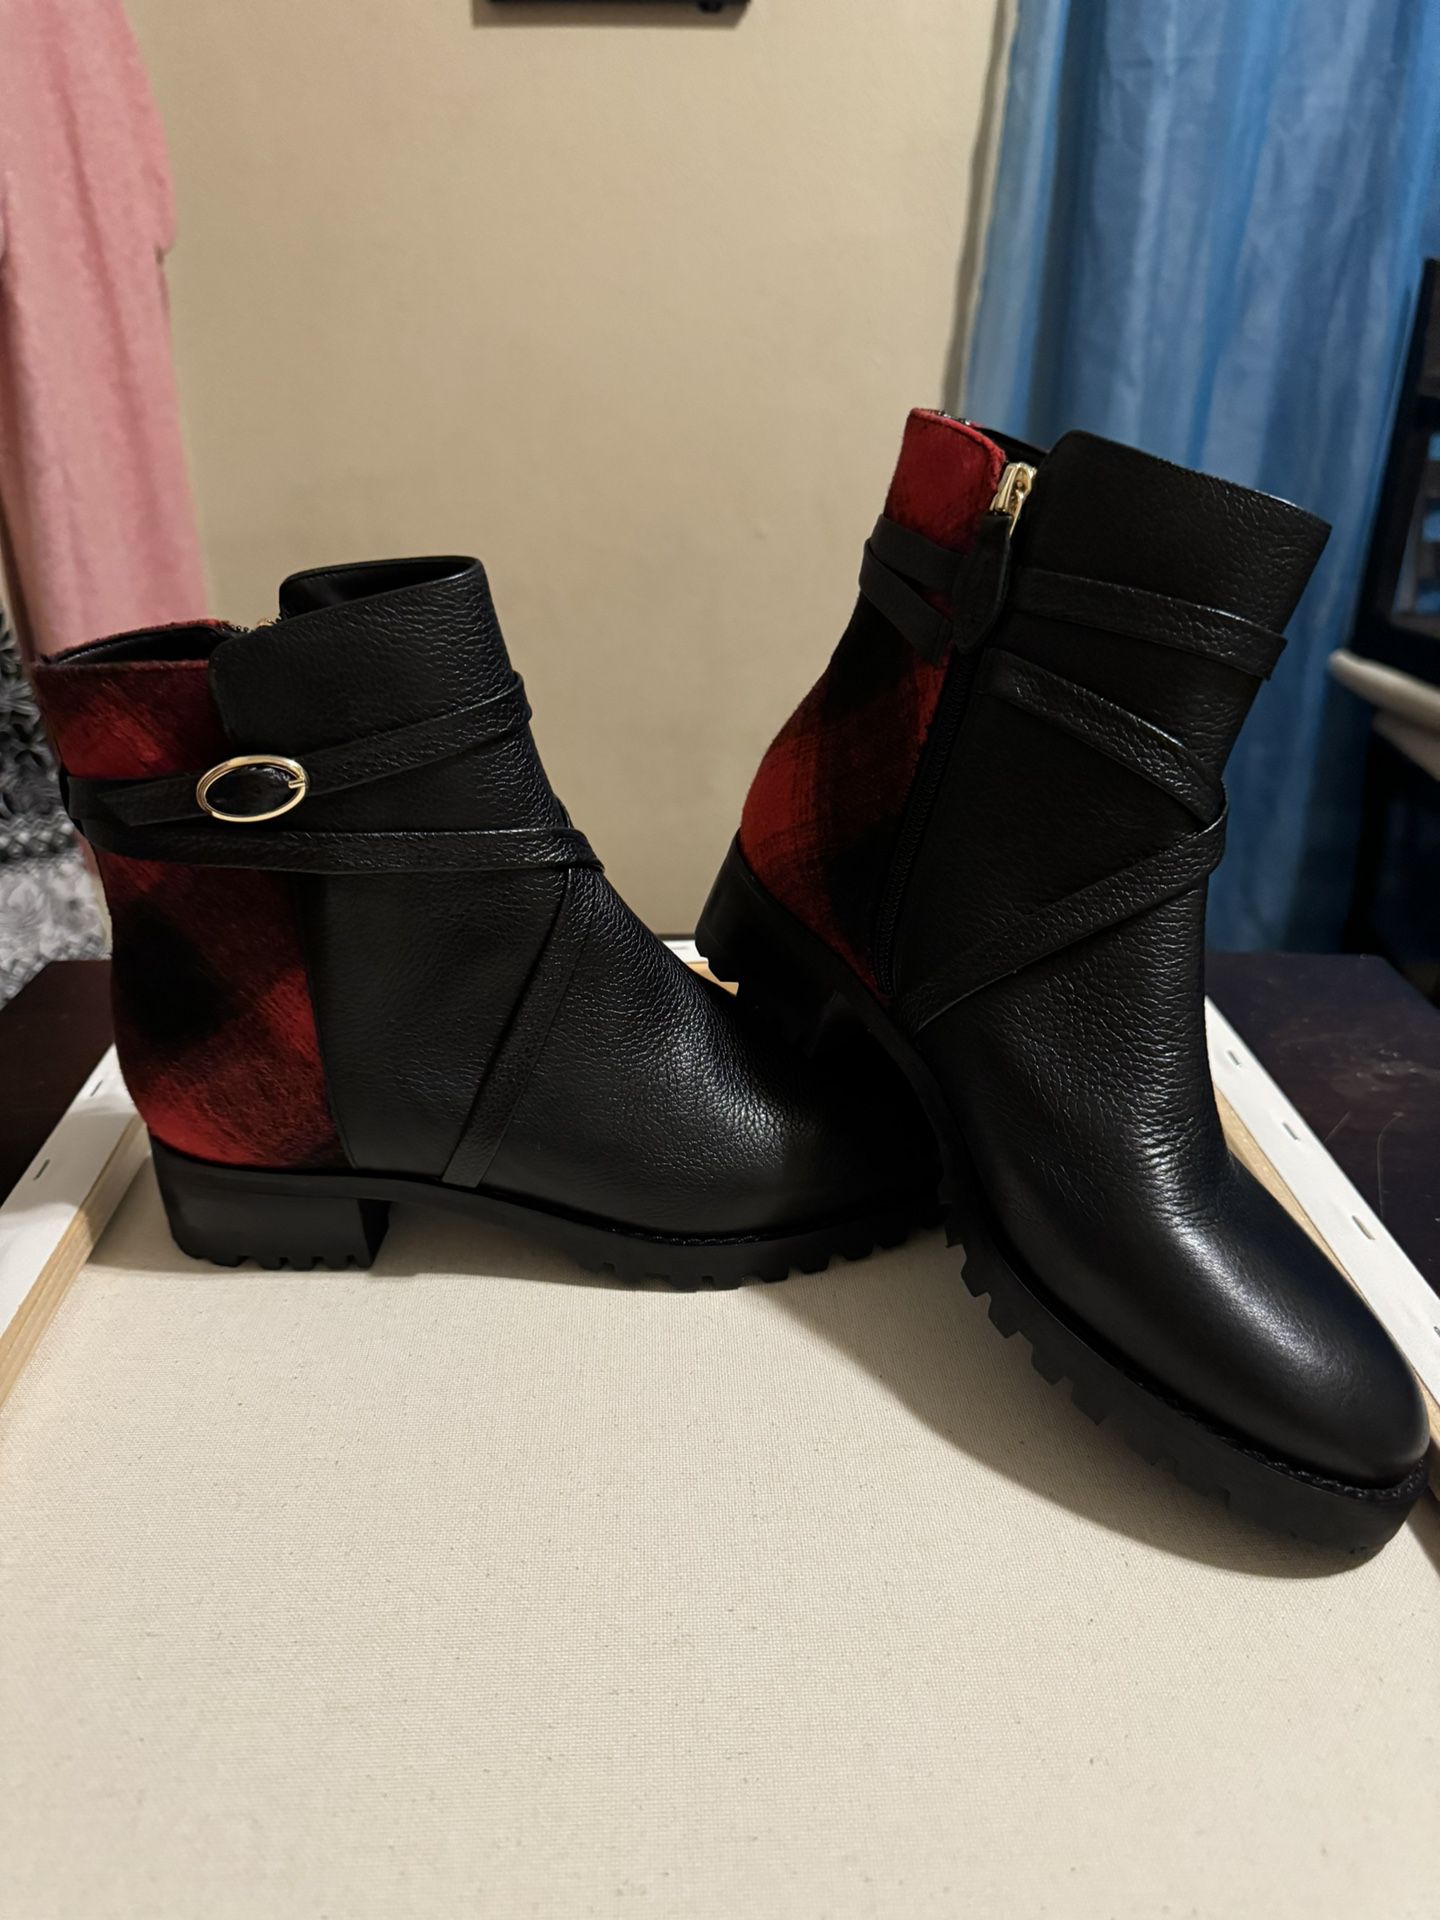 TALBOTS BELTED LEATHER ANKLE BOOTS Size 7.5 Women